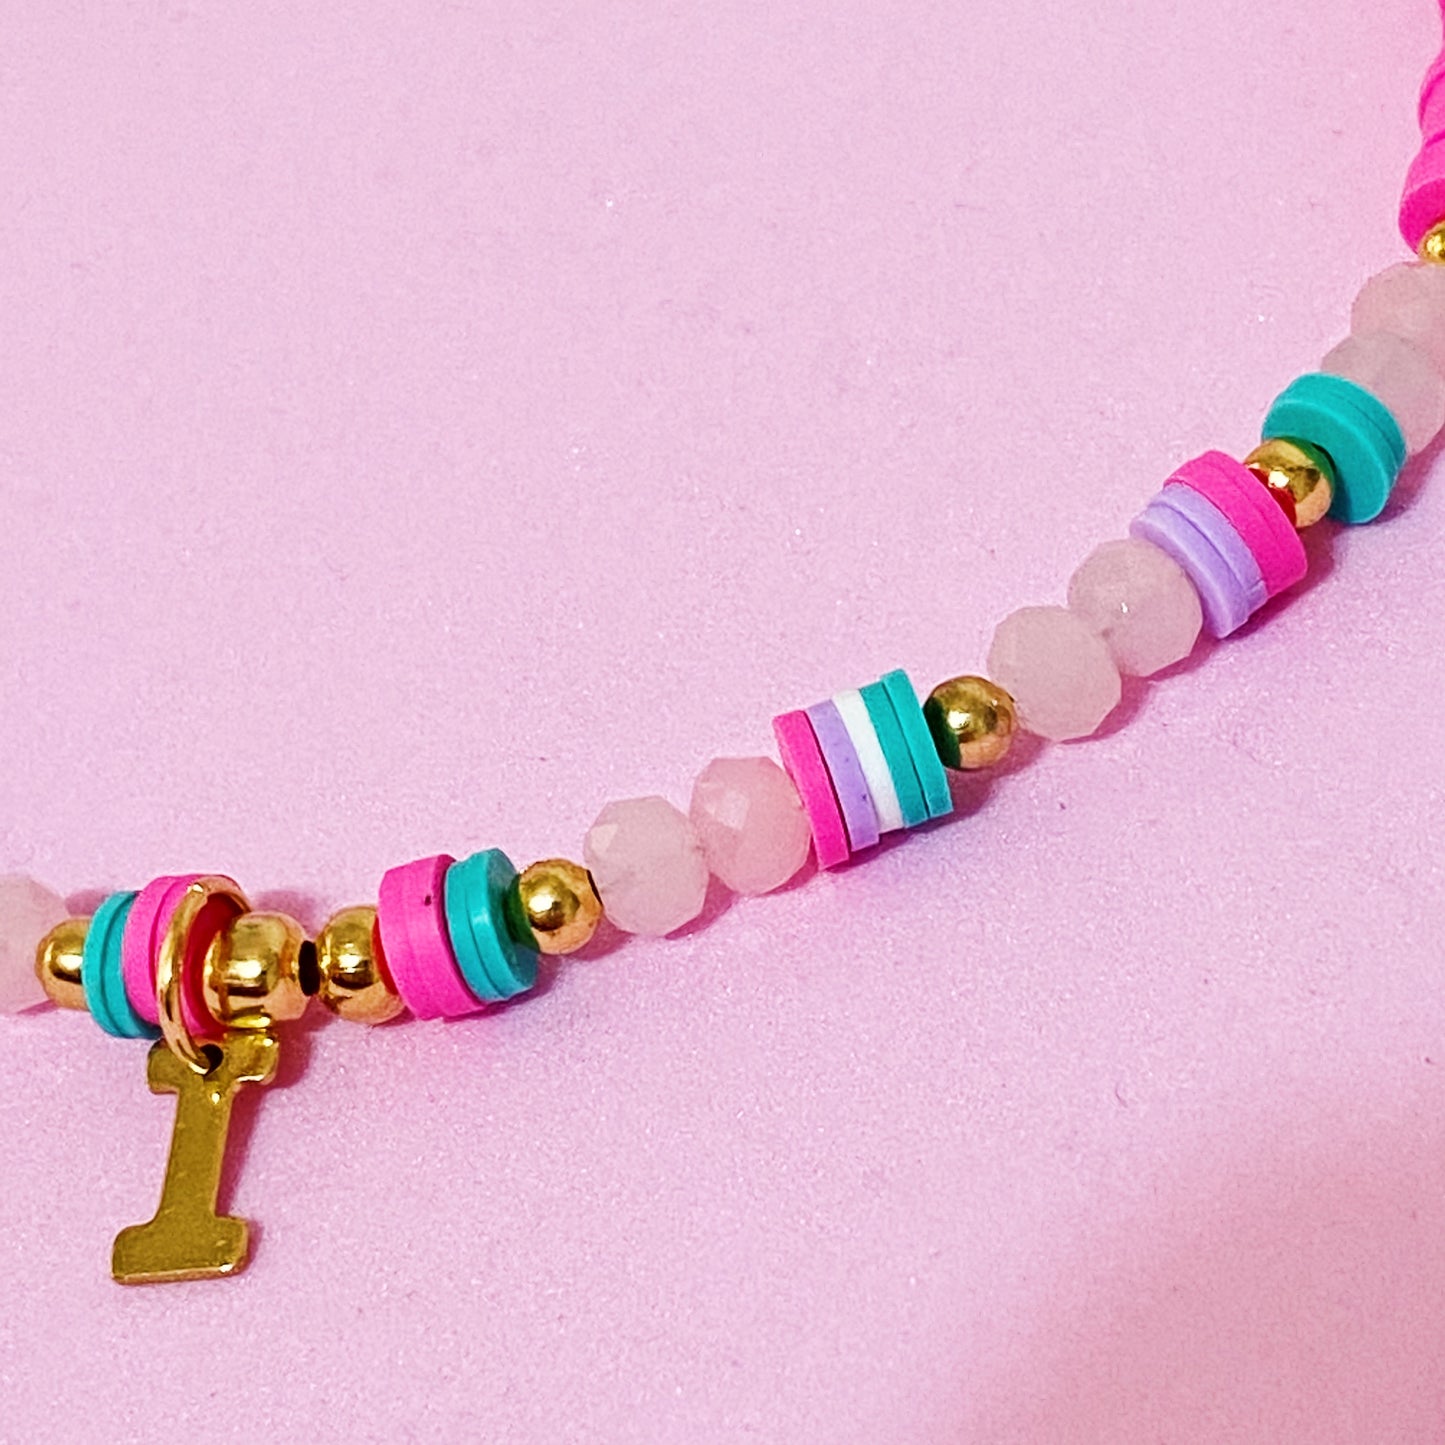 Pinky Necklace con o sin inicial - ROCKmint